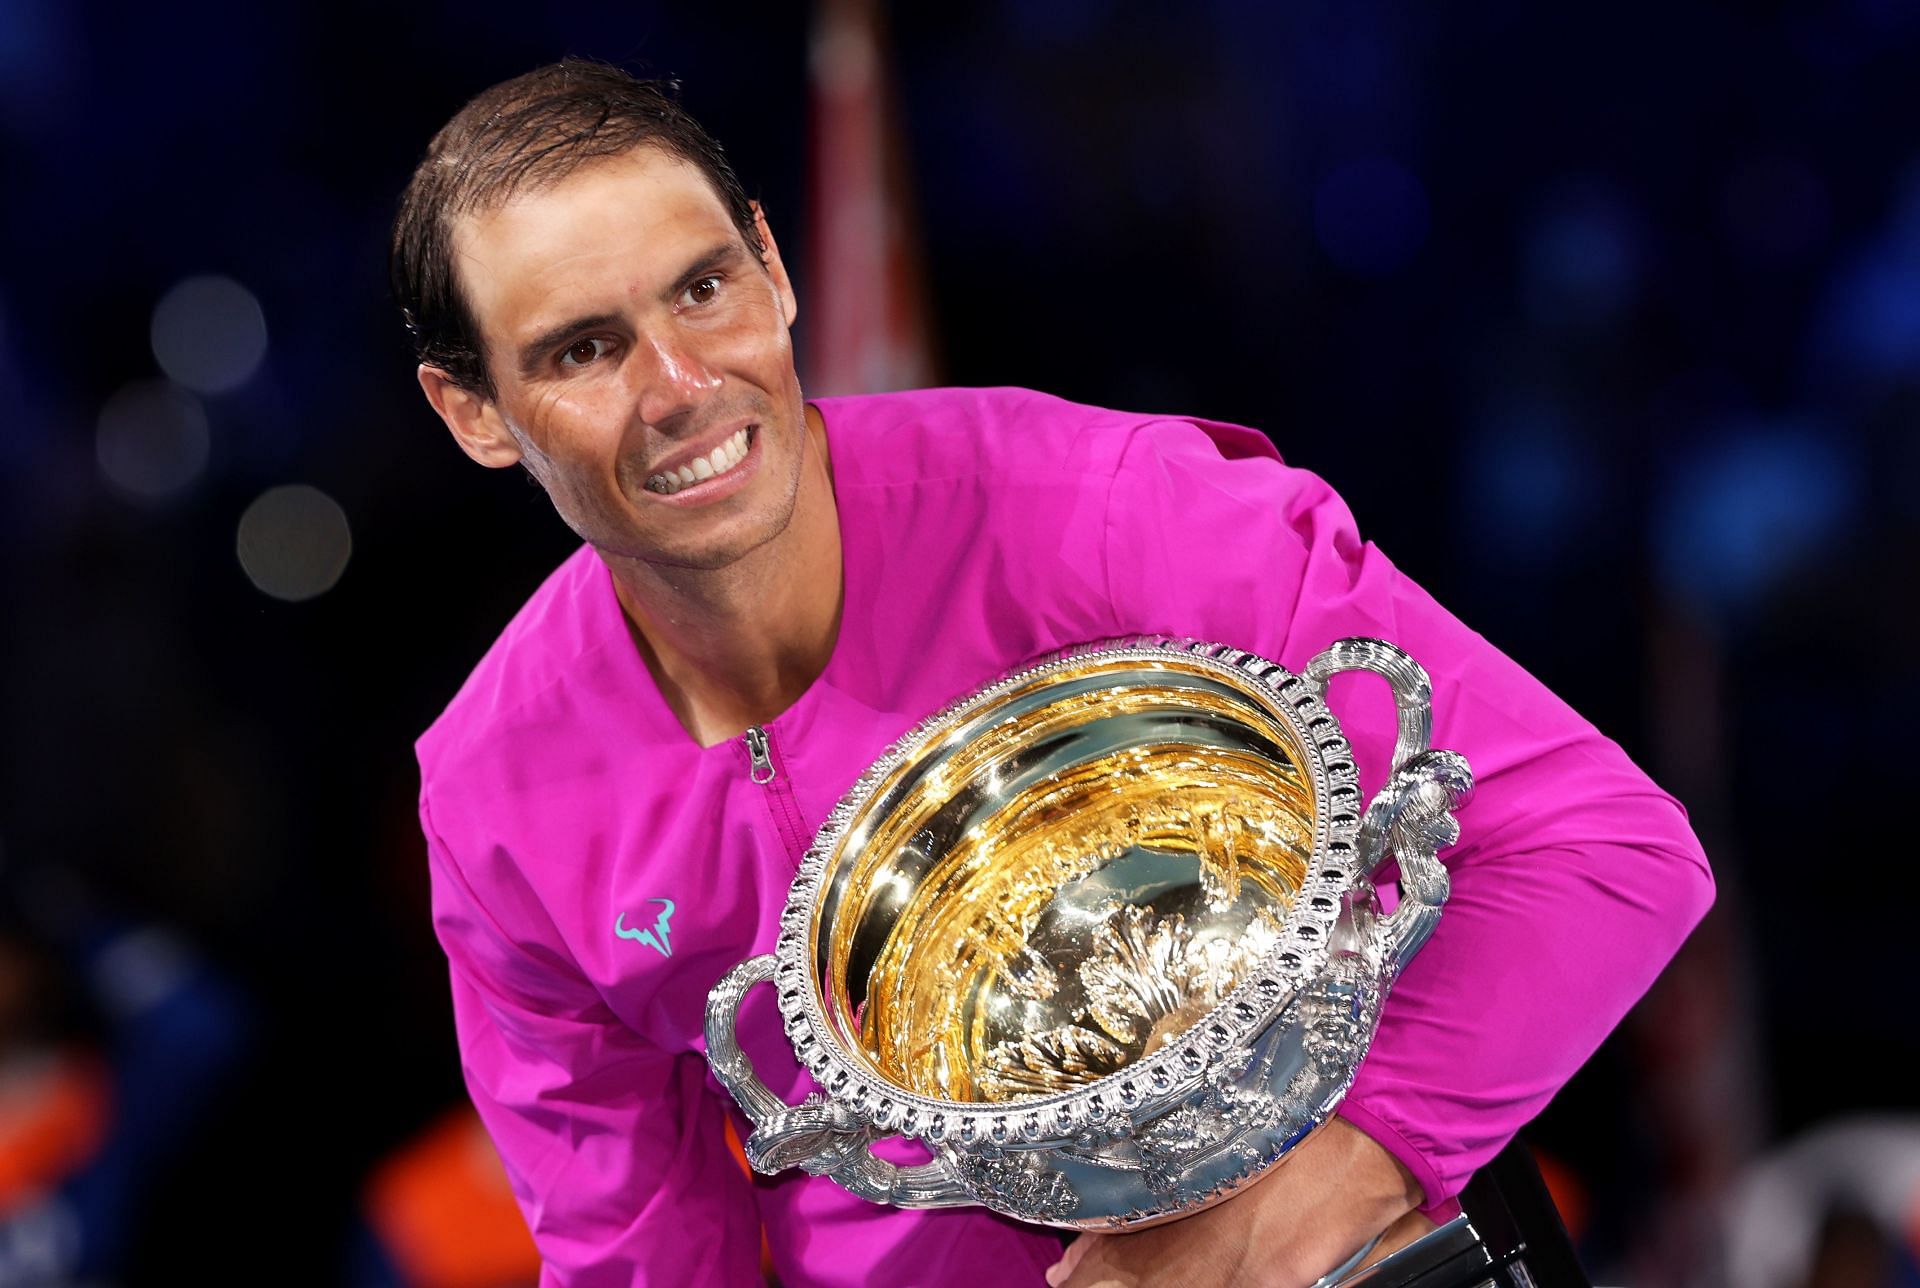 Nadal won his second Australian Open crown this year